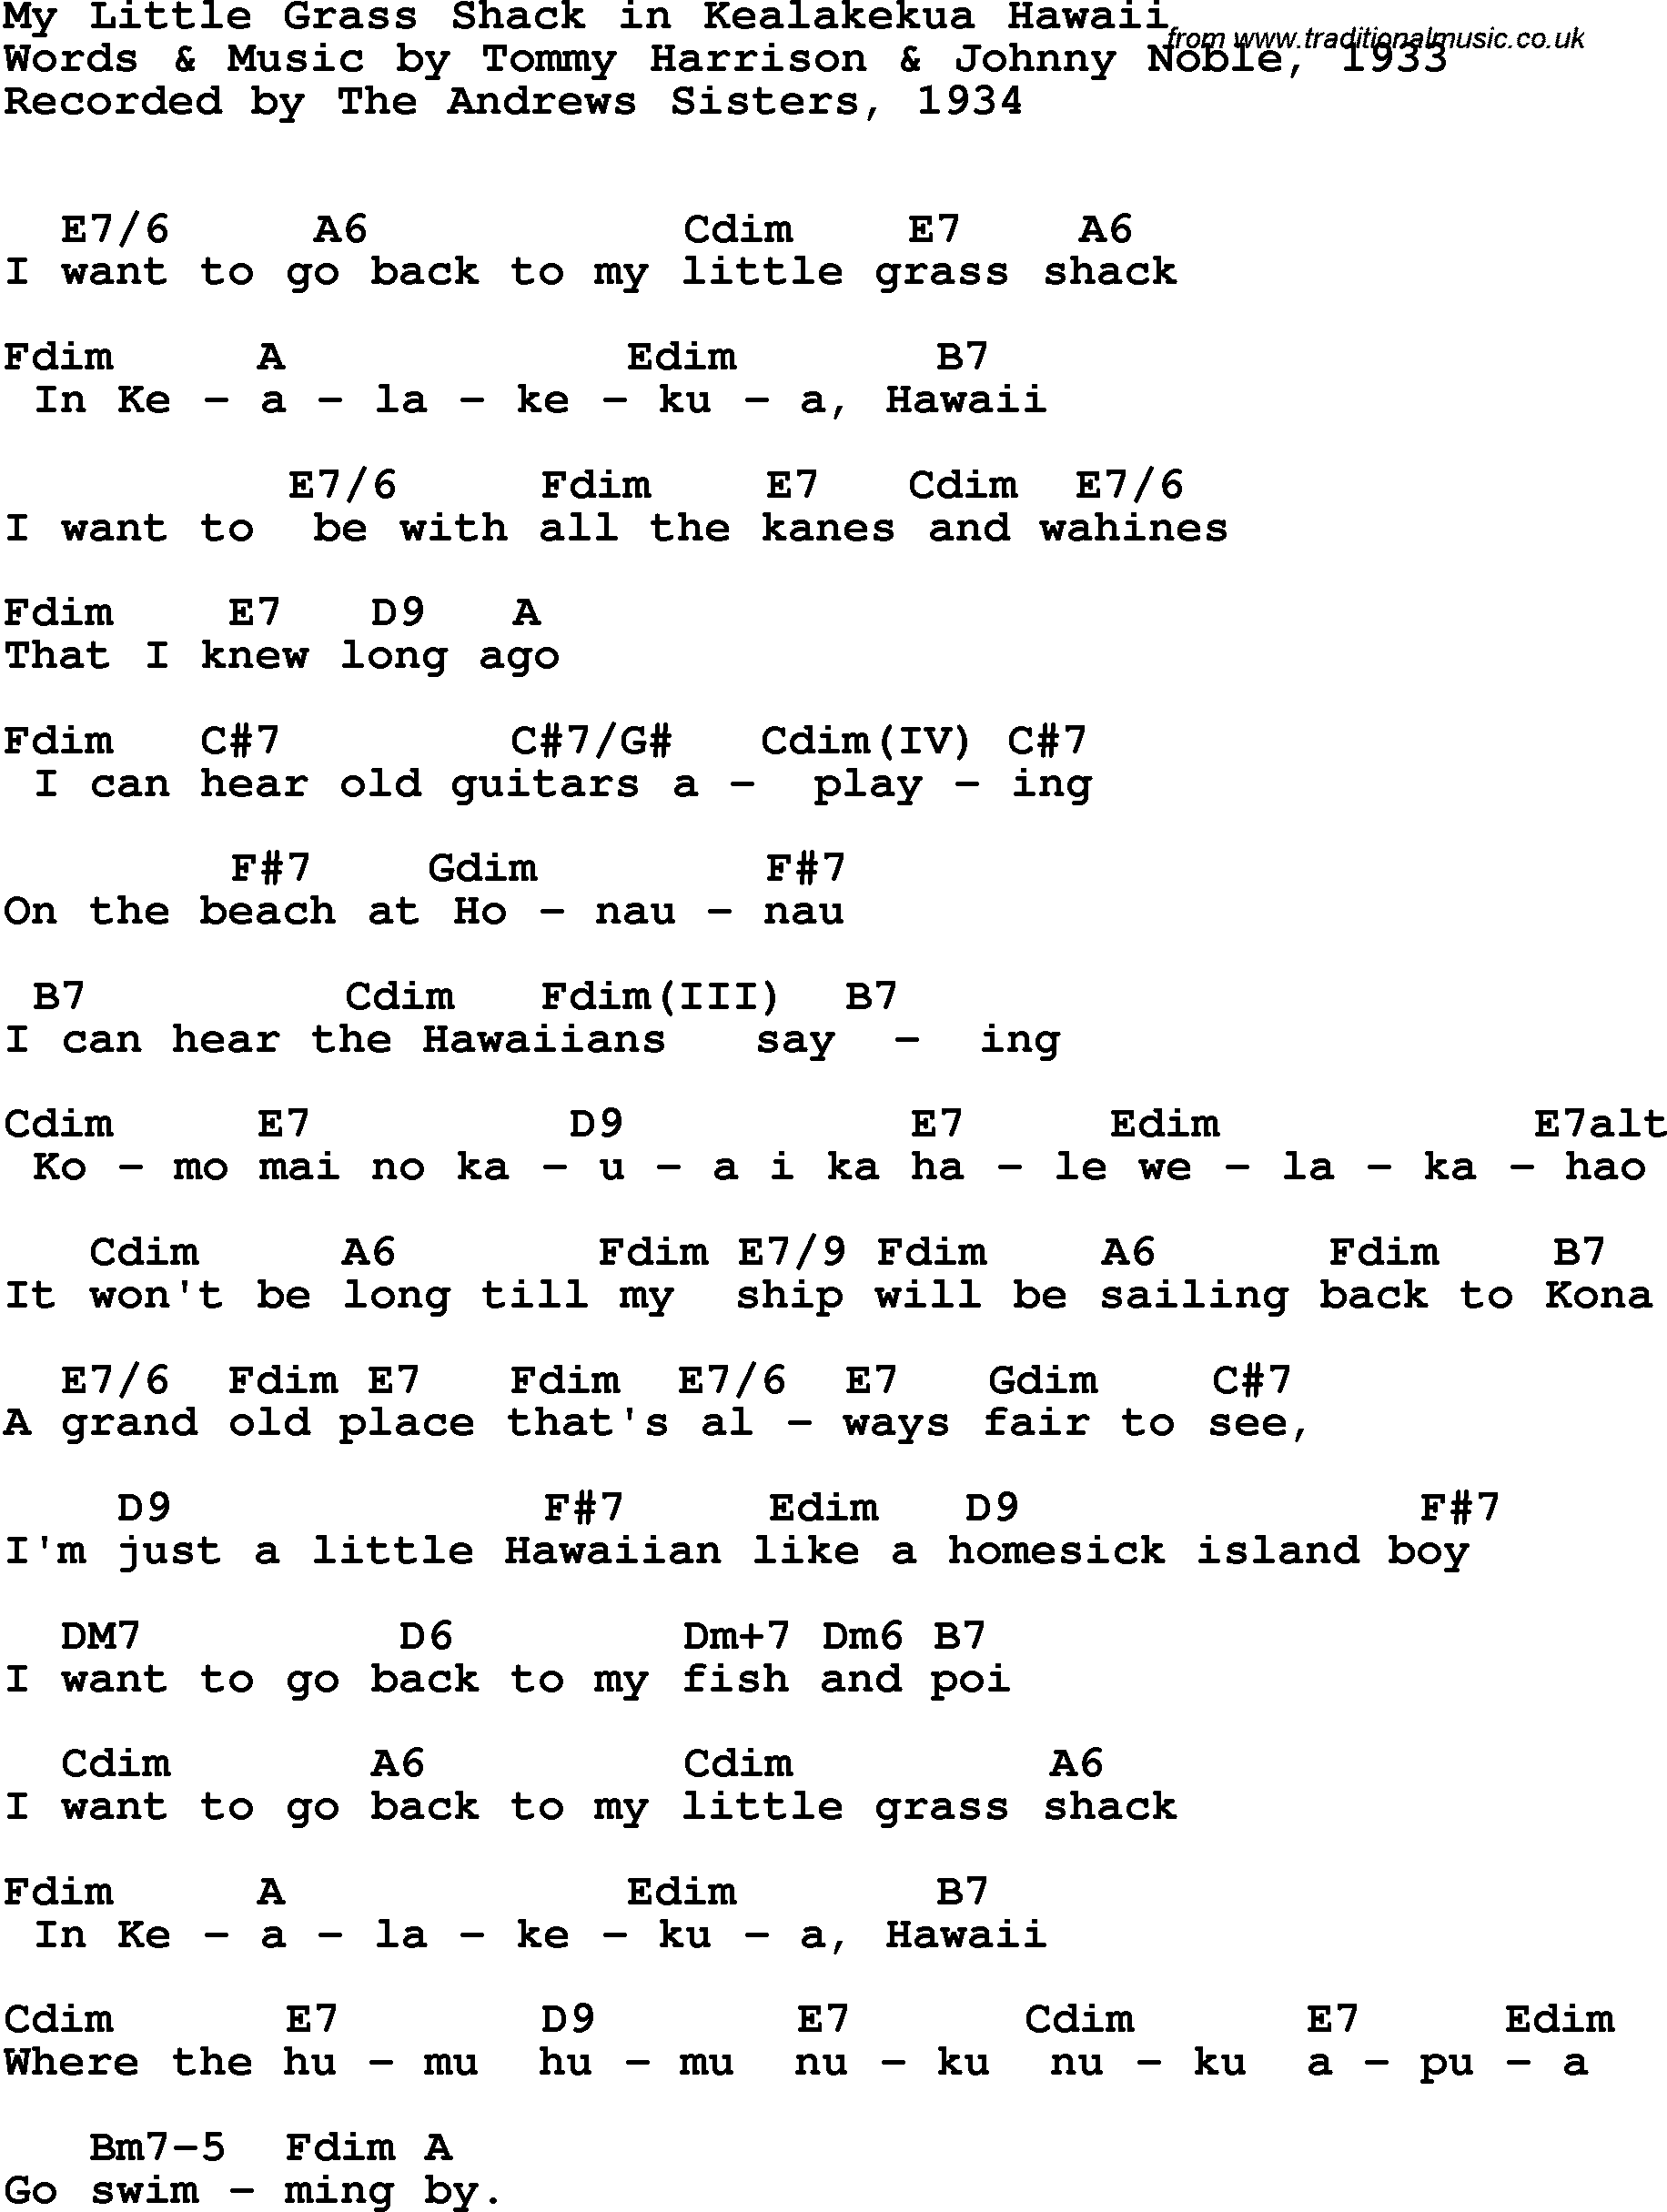 Song Lyrics with guitar chords for My Little Grass Shack - The Andrews Sisters, 1934